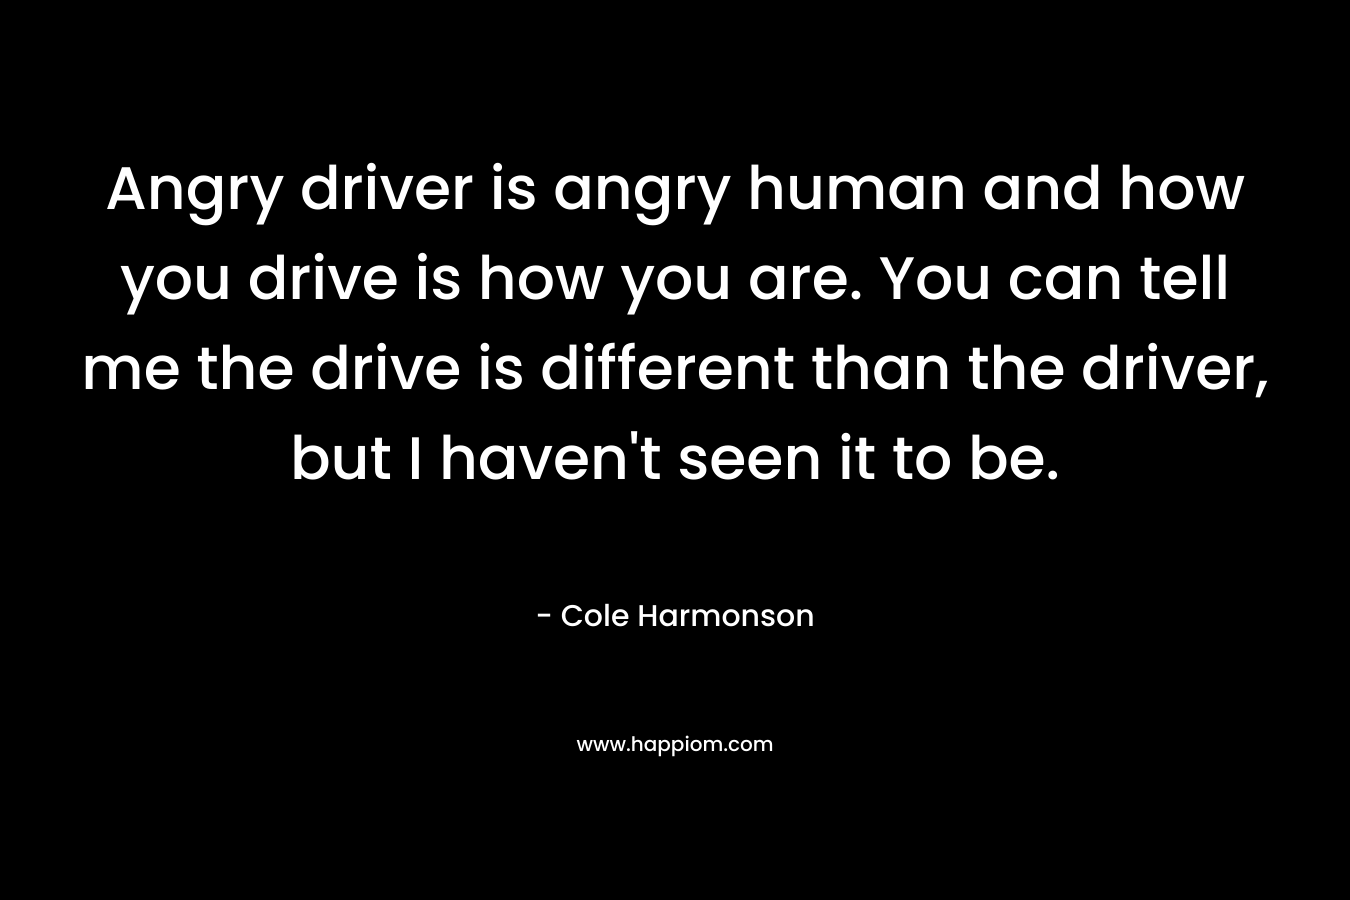 Angry driver is angry human and how you drive is how you are. You can tell me the drive is different than the driver, but I haven't seen it to be.